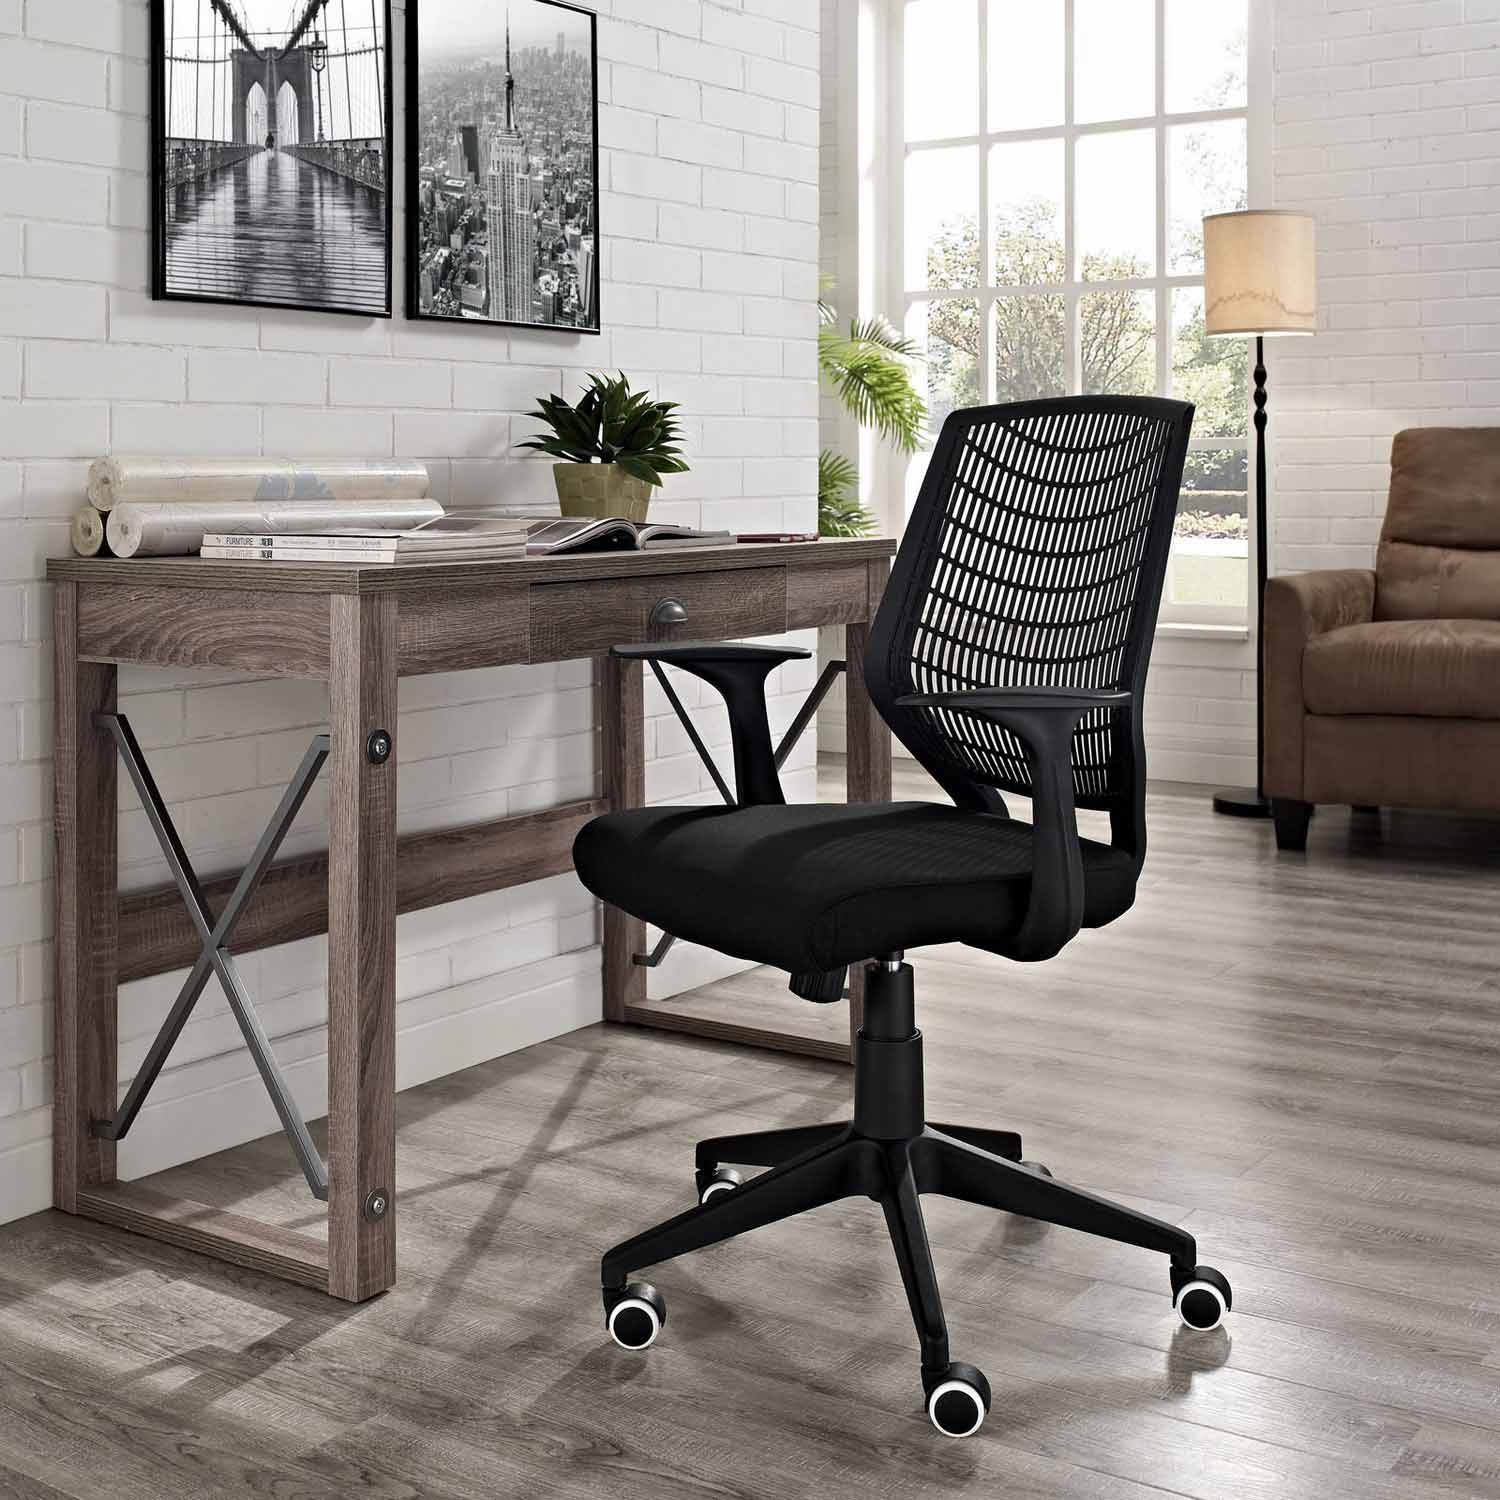 Modway Entrada Office Chair - Black